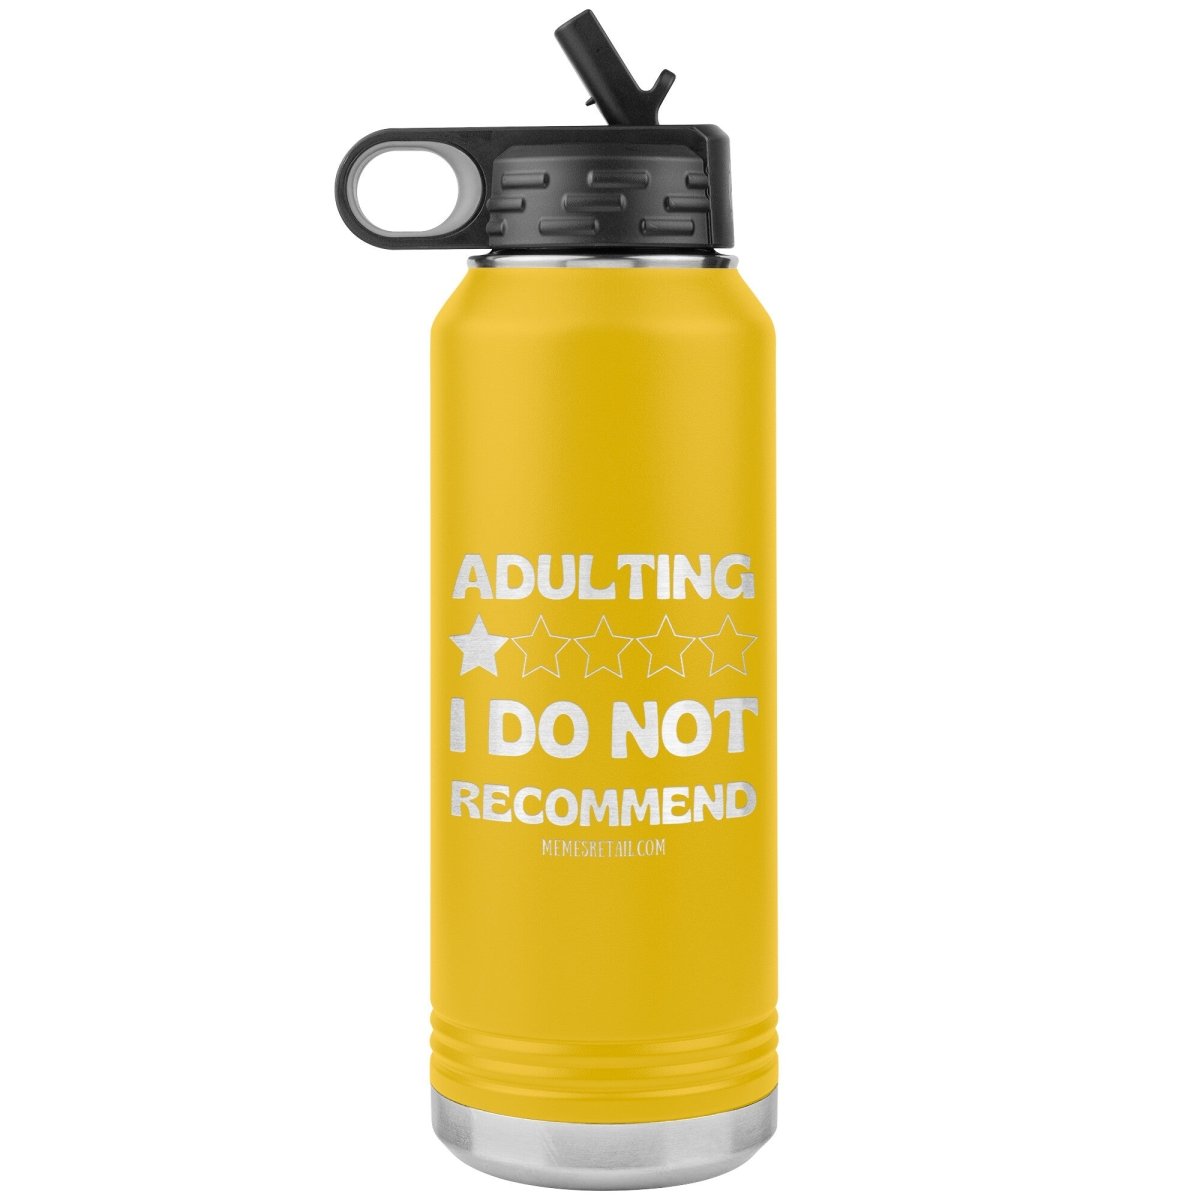 Adulting, 1 Star, I do not recommend 32oz Water Tumblers, Yellow - MemesRetail.com